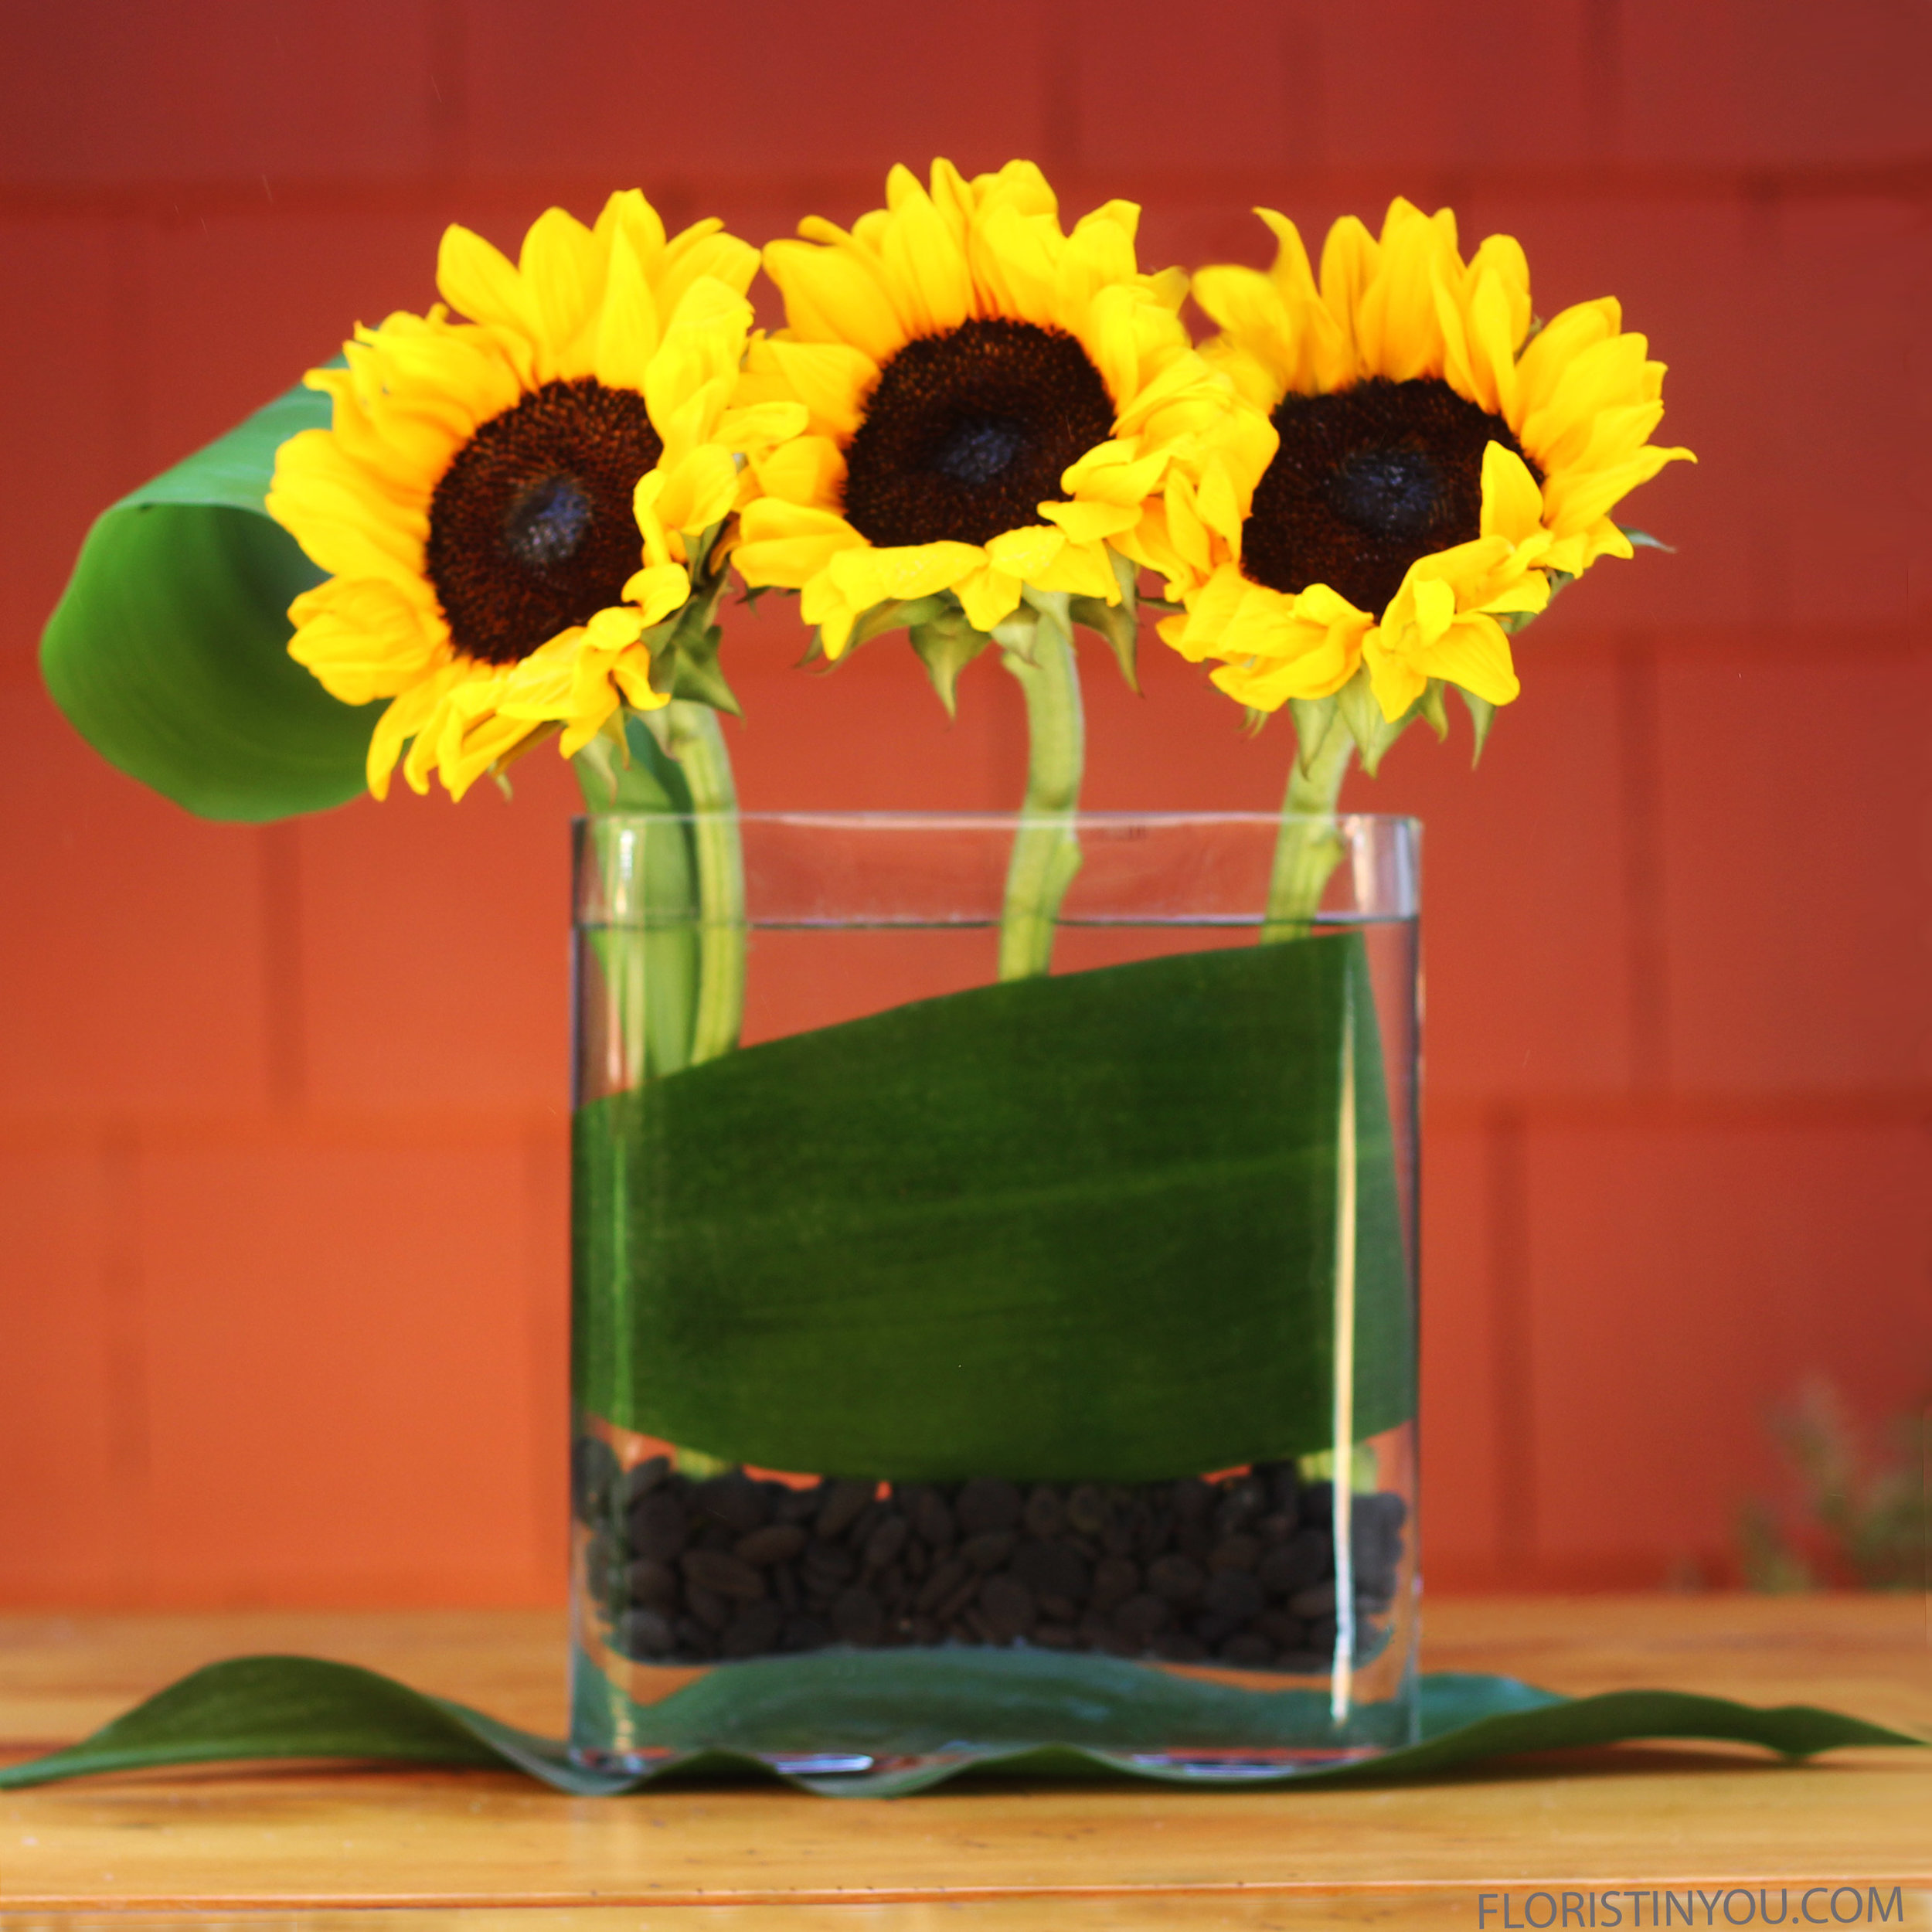 Sunflowers in a Rounded Edge Vase